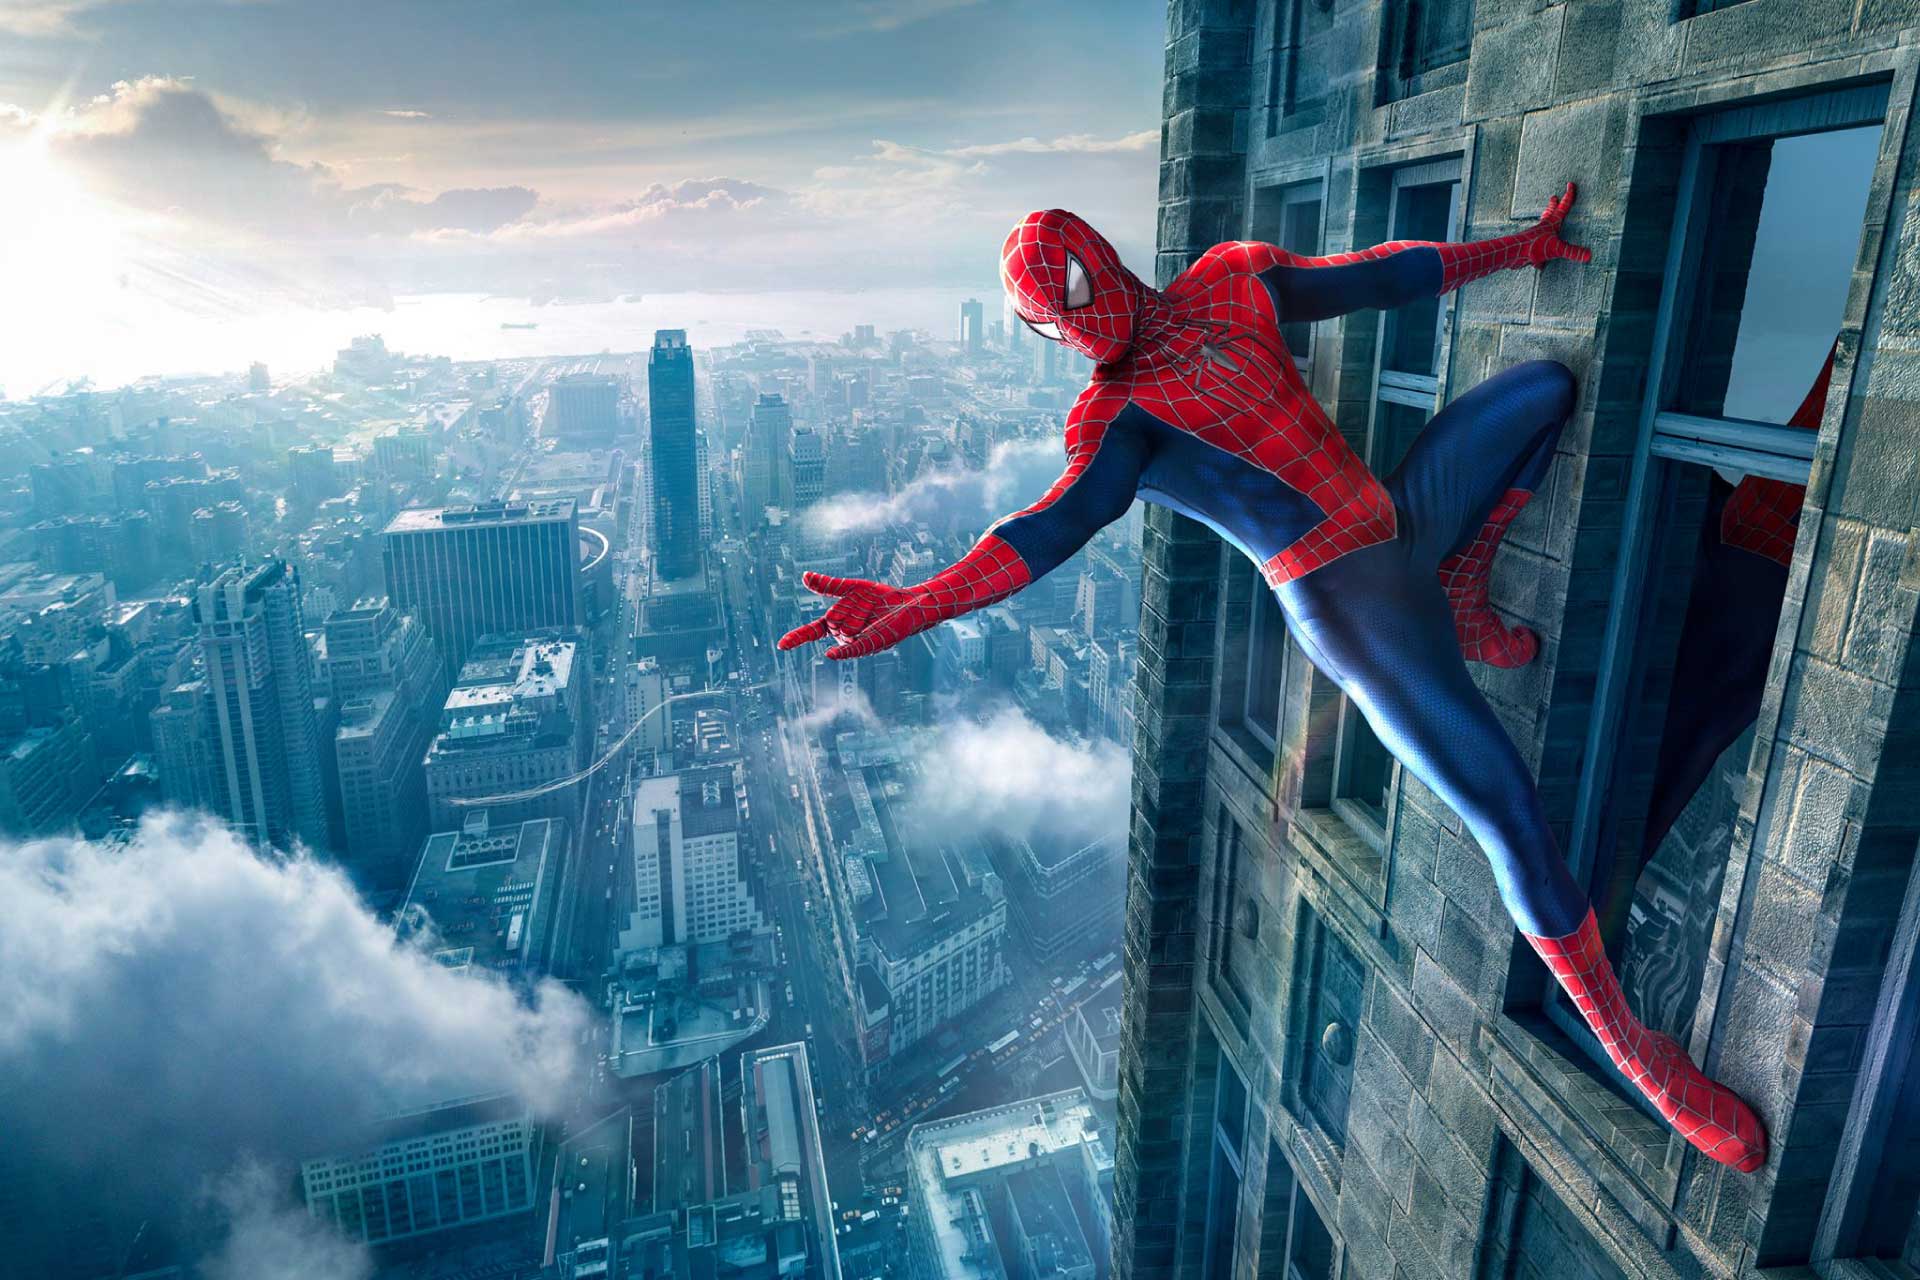 4k Spiderman New York Hd Superheroes 4k Wallpapers Images Images And